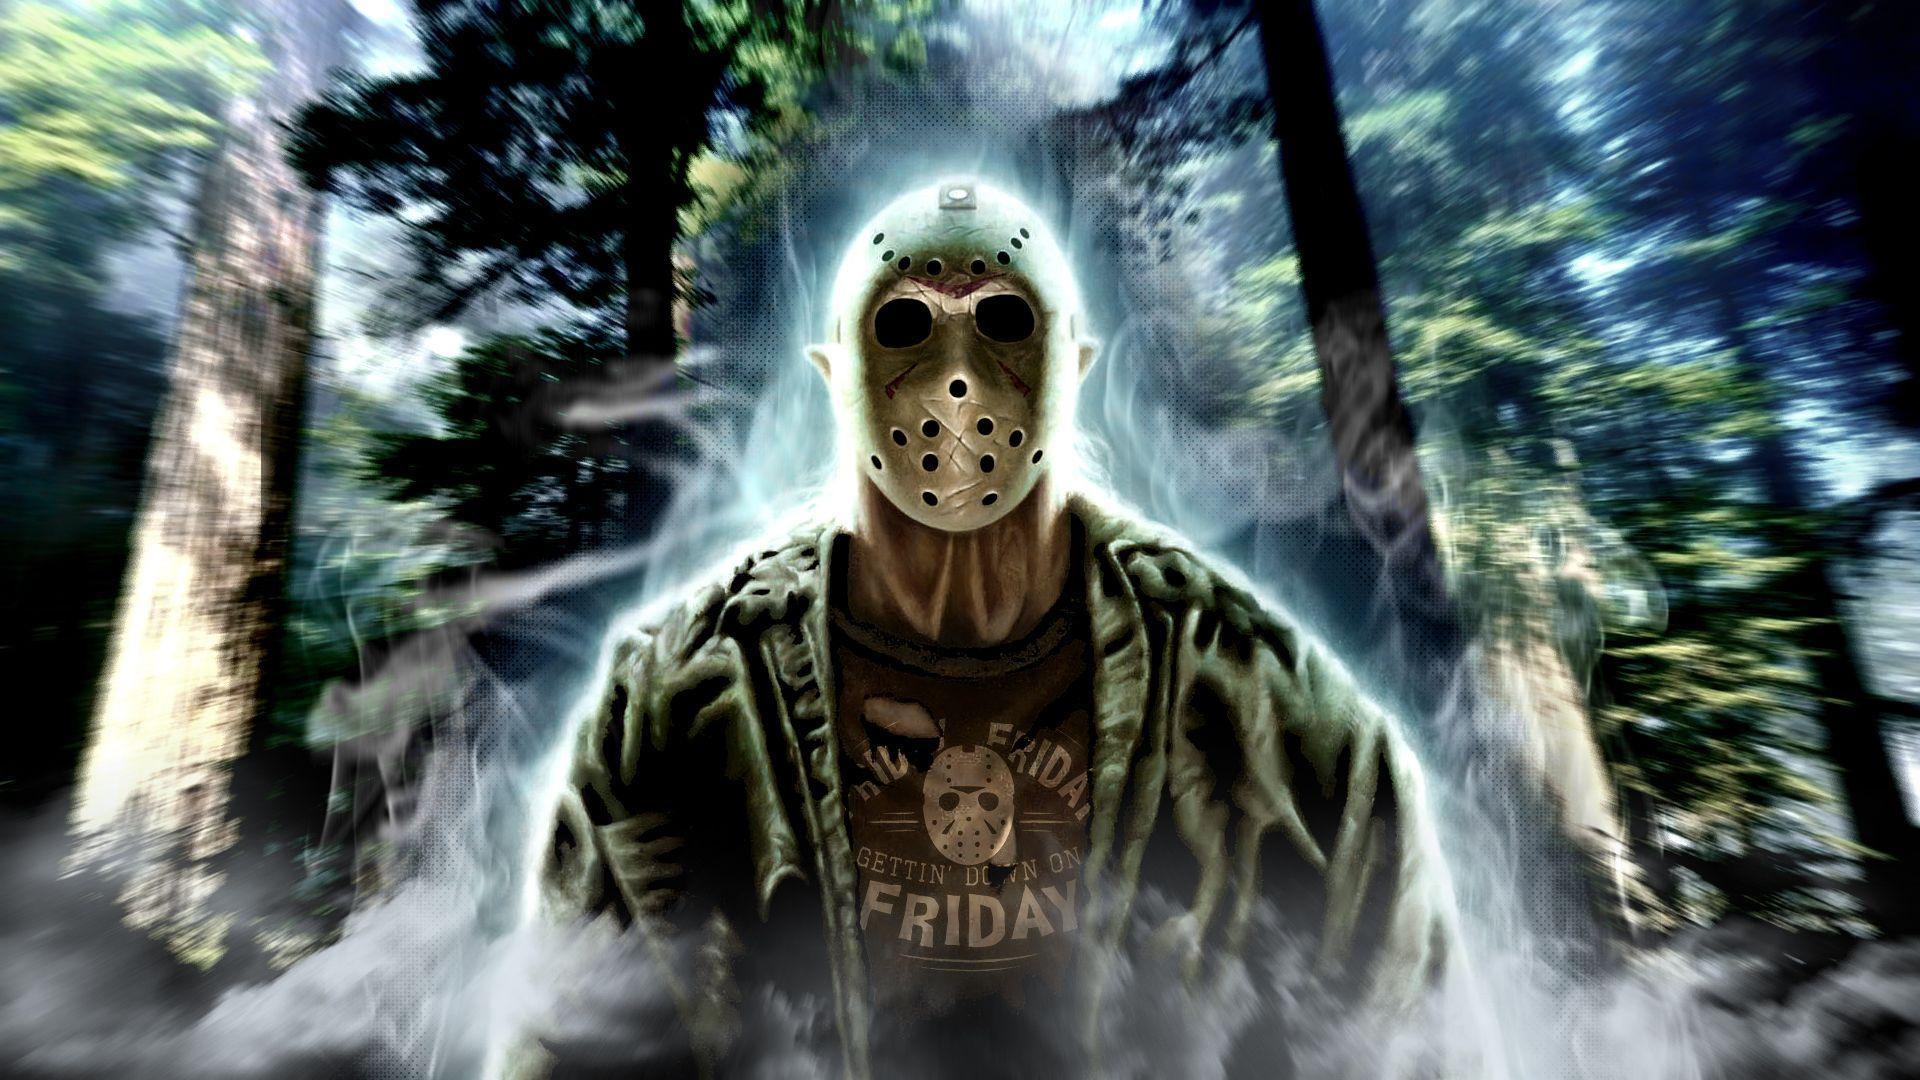 407446 4K knife Friday the 13th hockey mask Jason fictional character  Horror movies  Rare Gallery HD Wallpapers